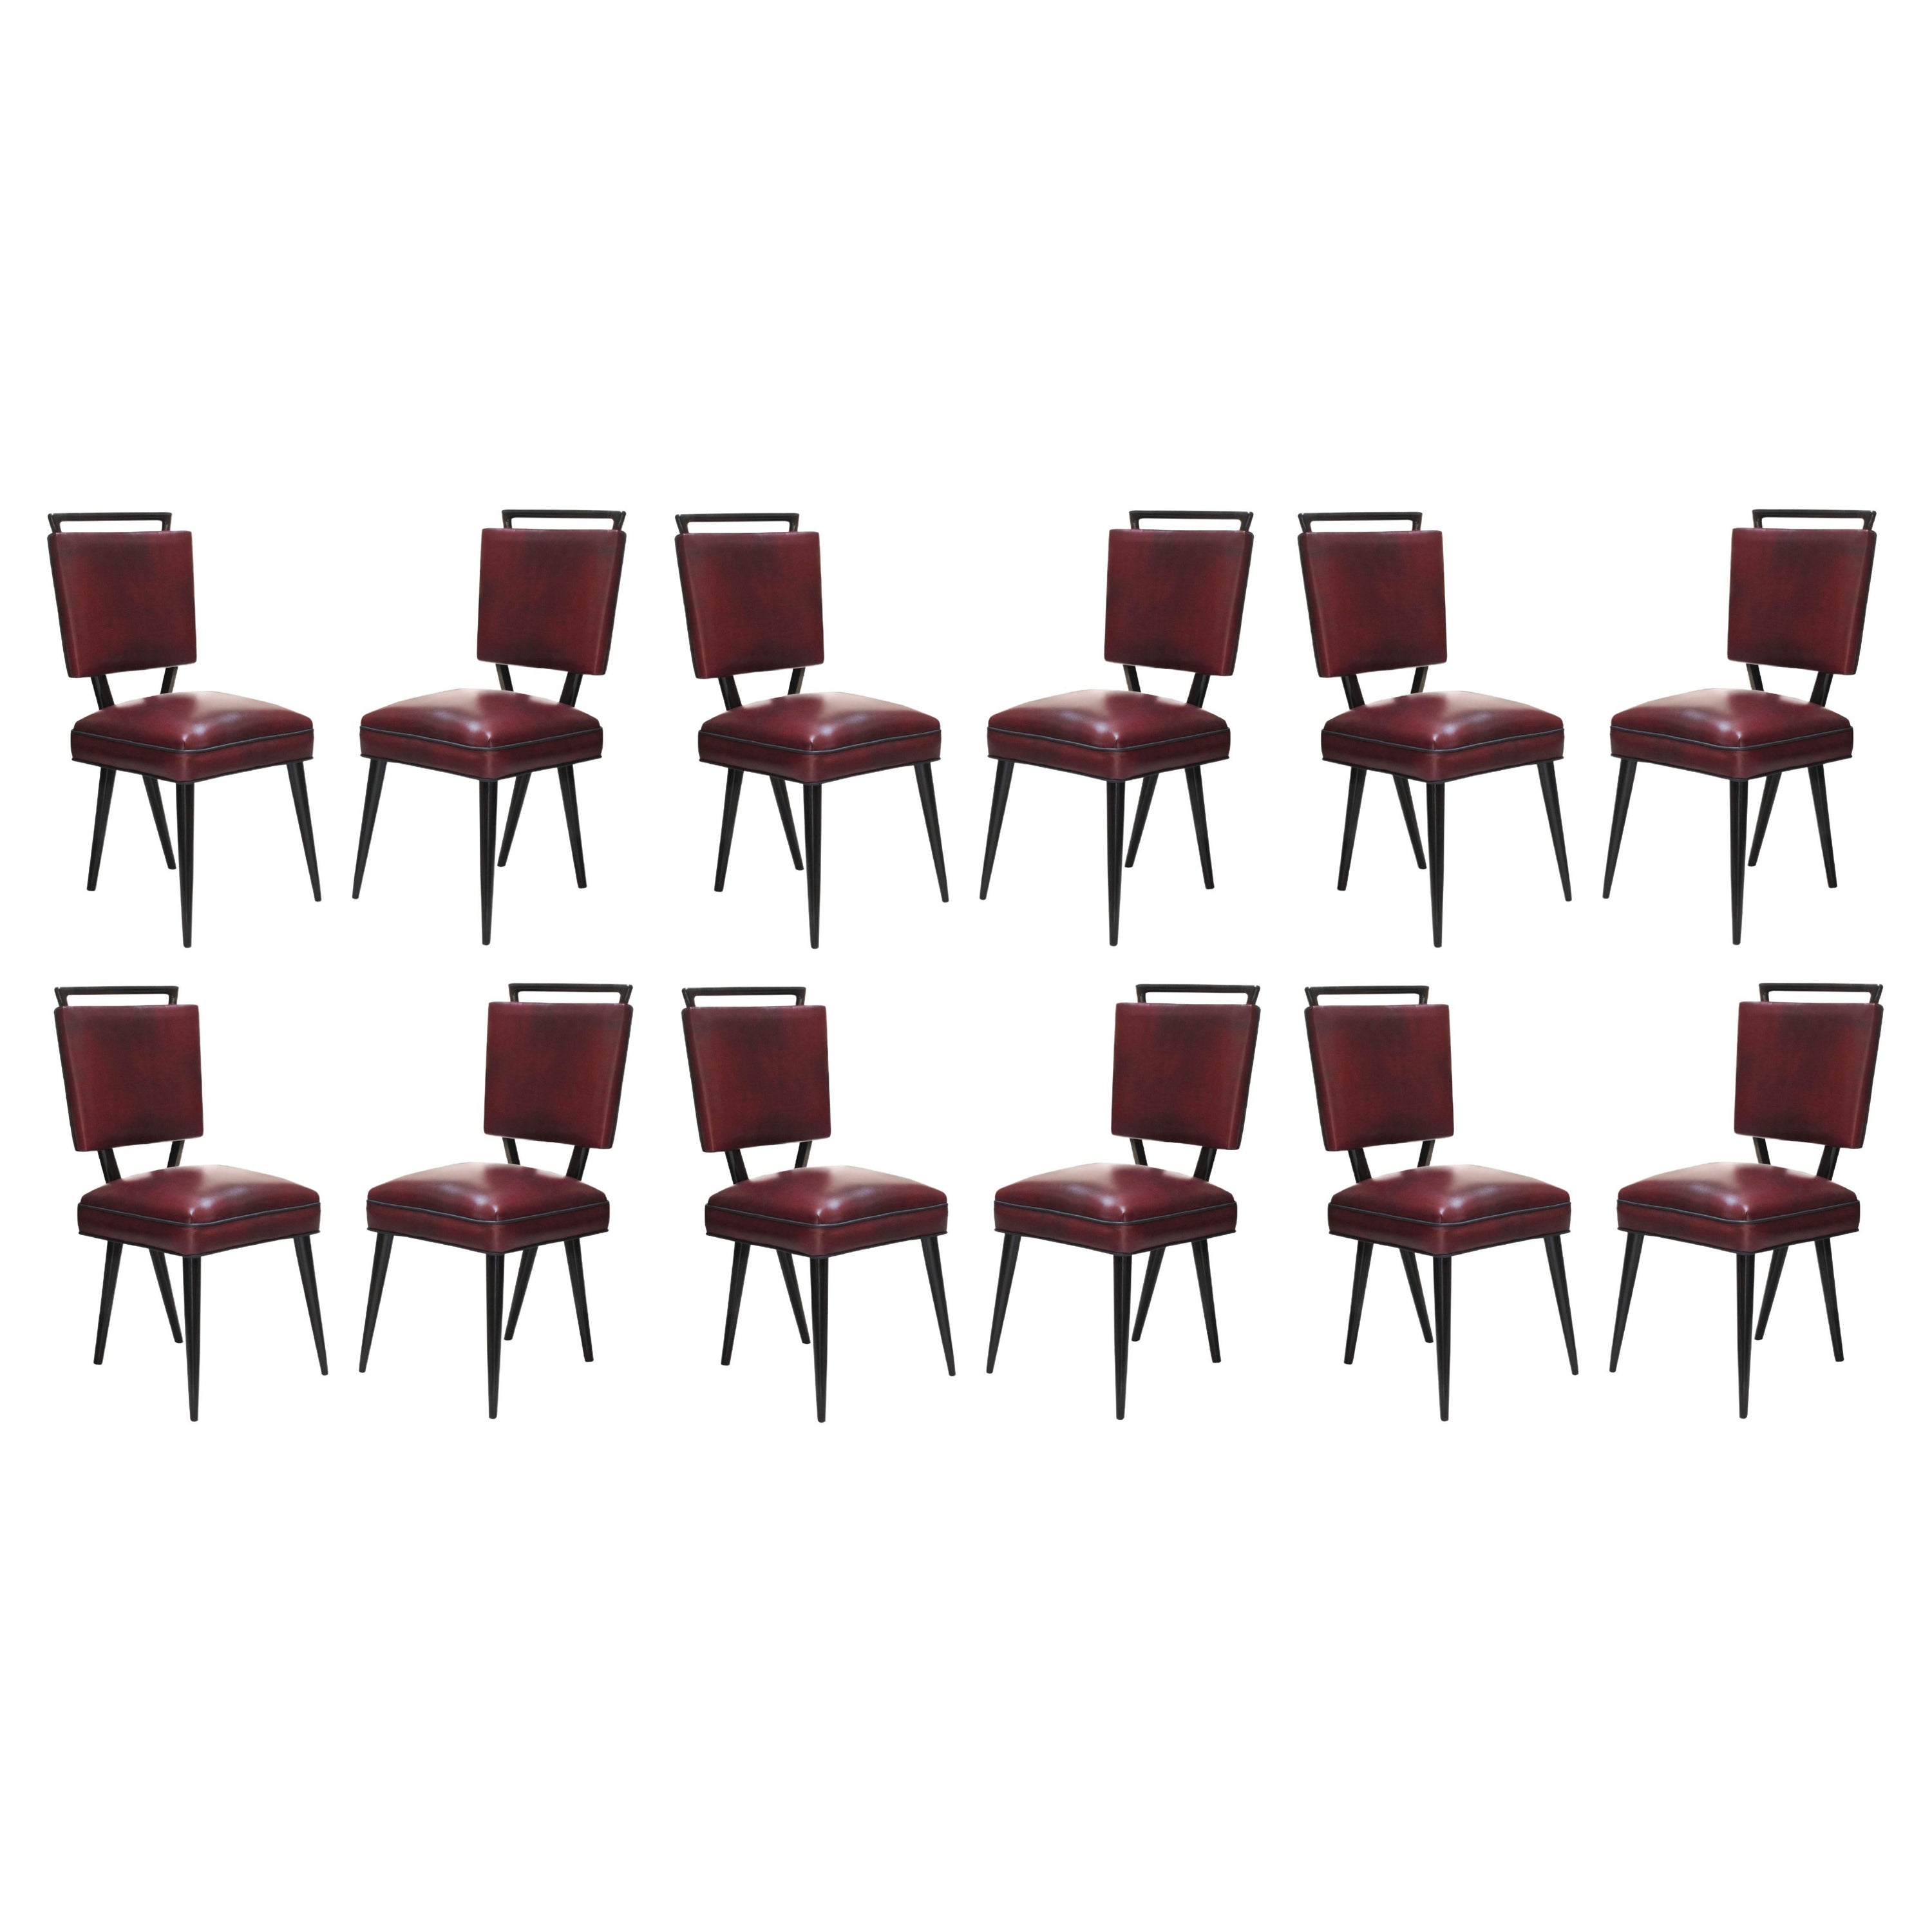 Set of 12 Chairs 50° in Leather and Wood, Italian